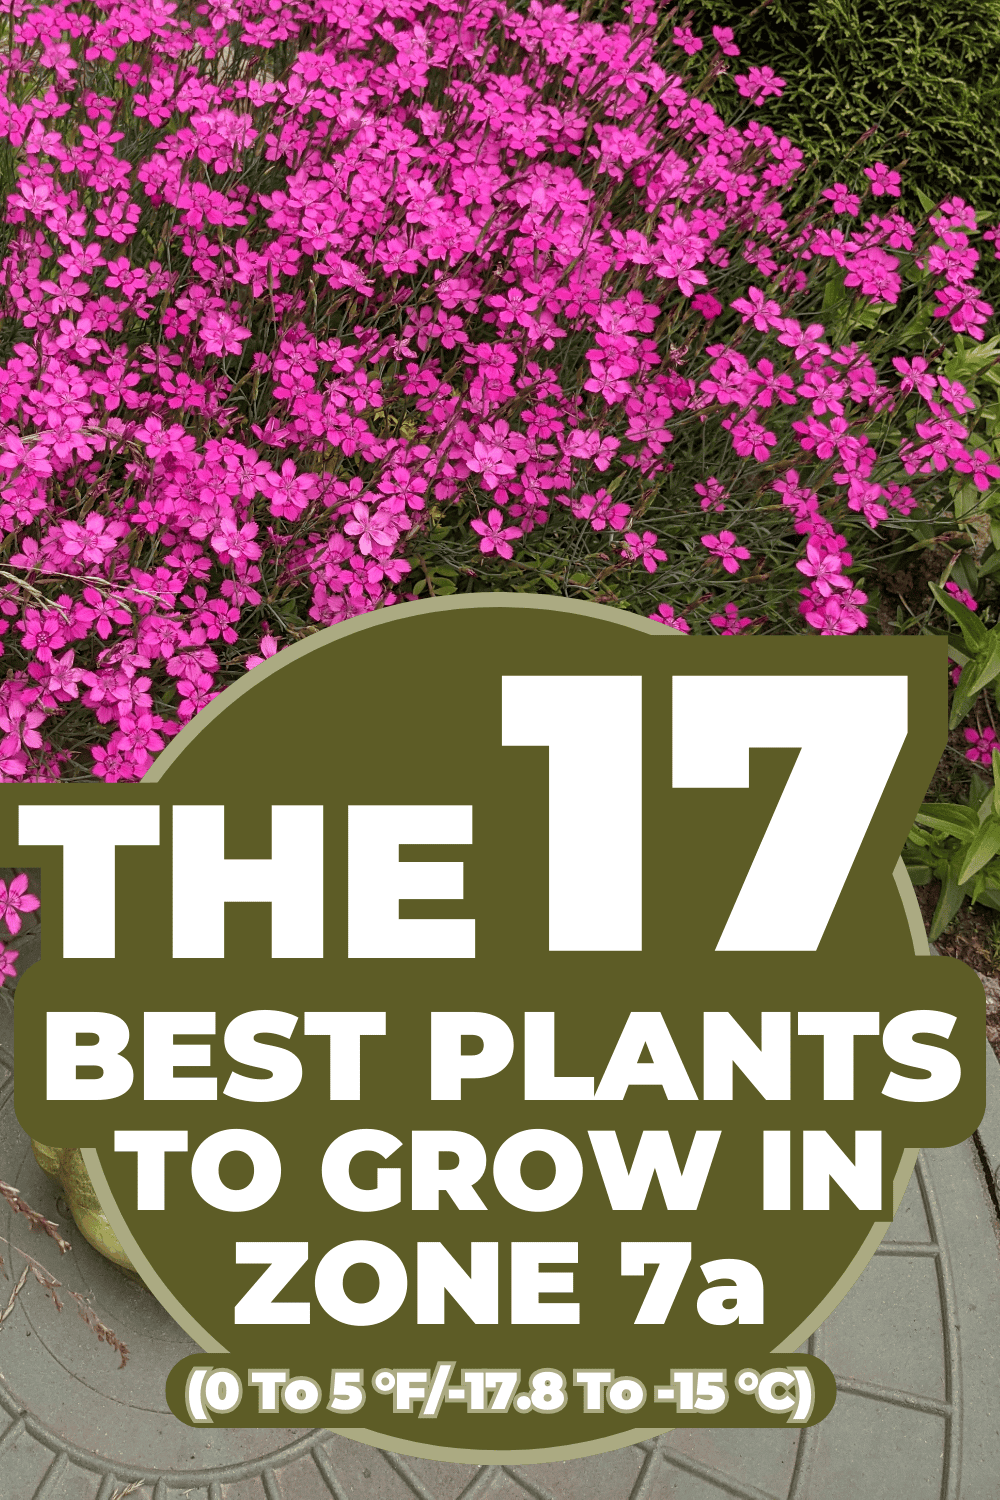 The 17 Best Plants To Grow In Zone 7a